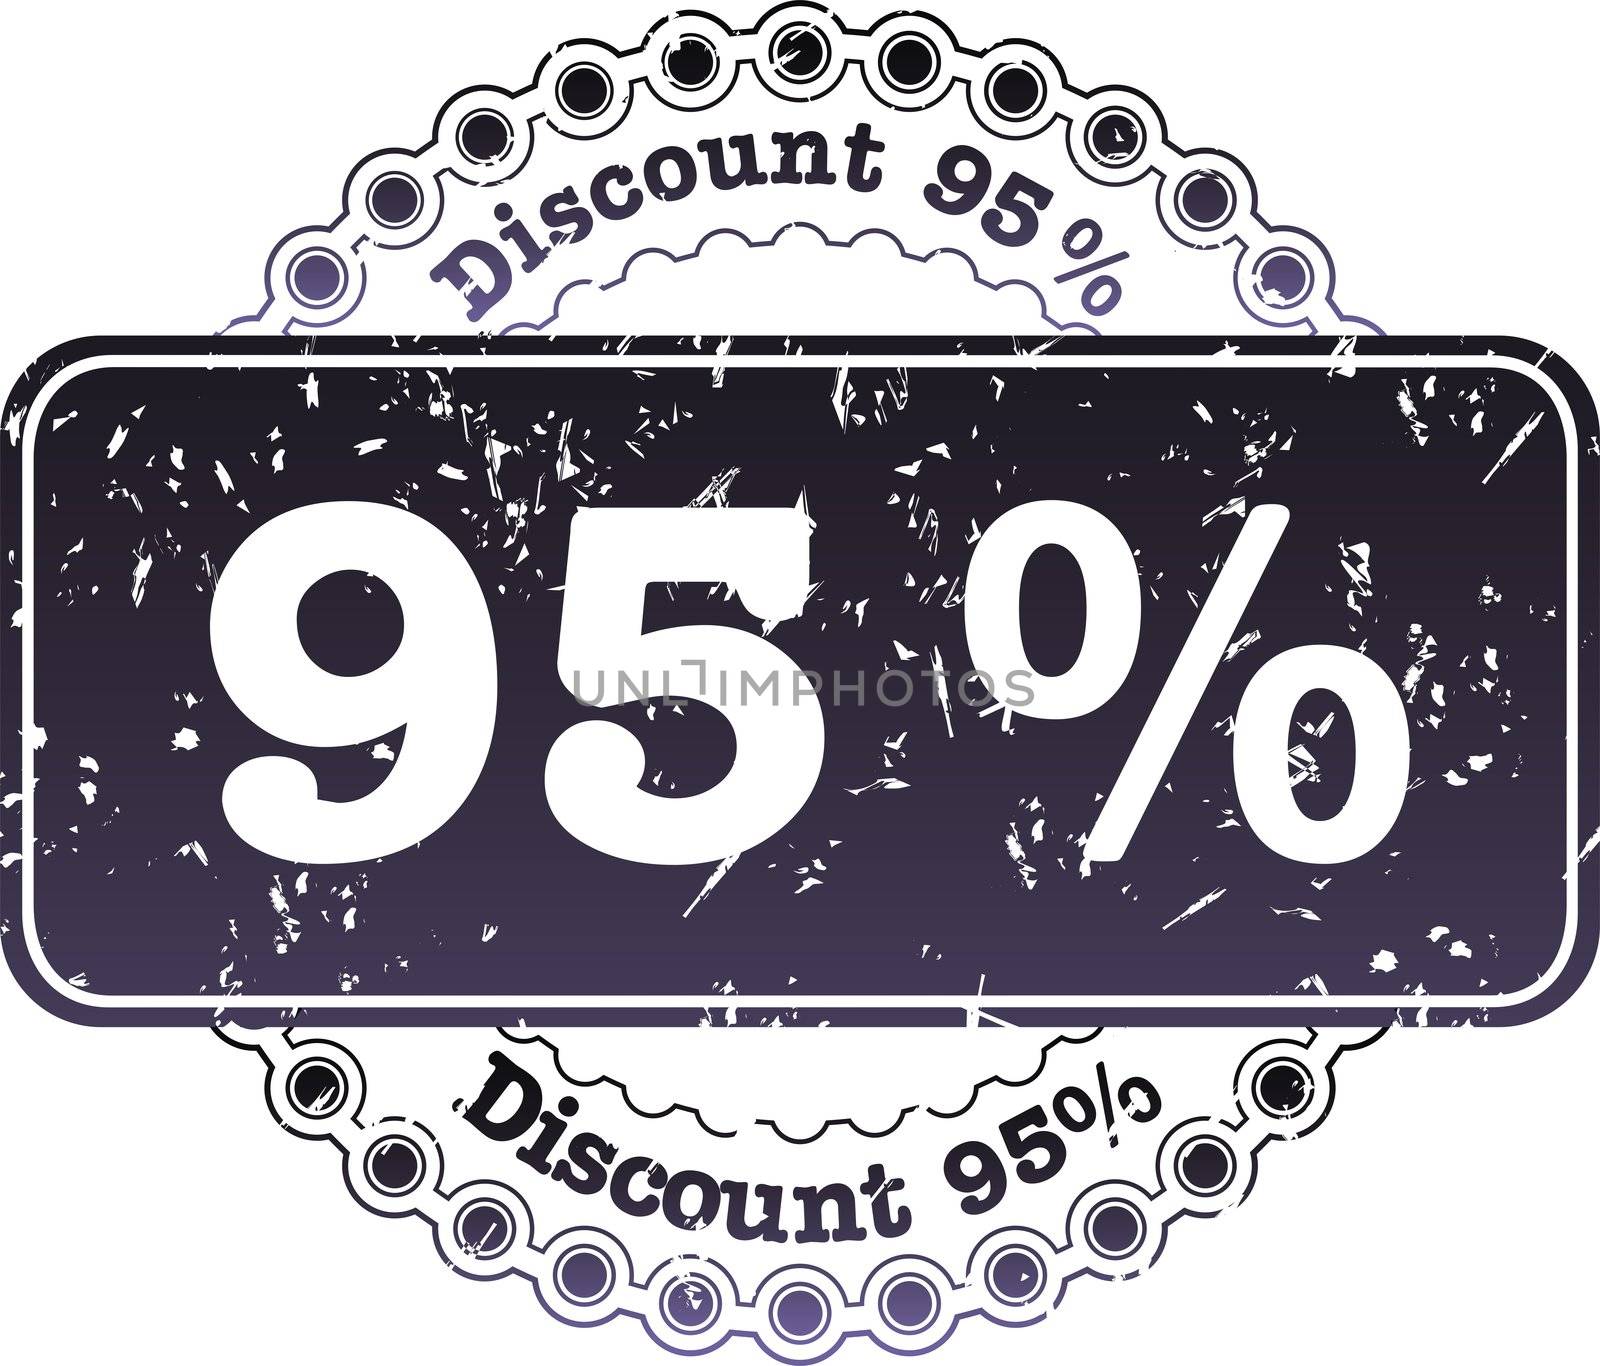 Stamp Discount ninety five percent by ard1